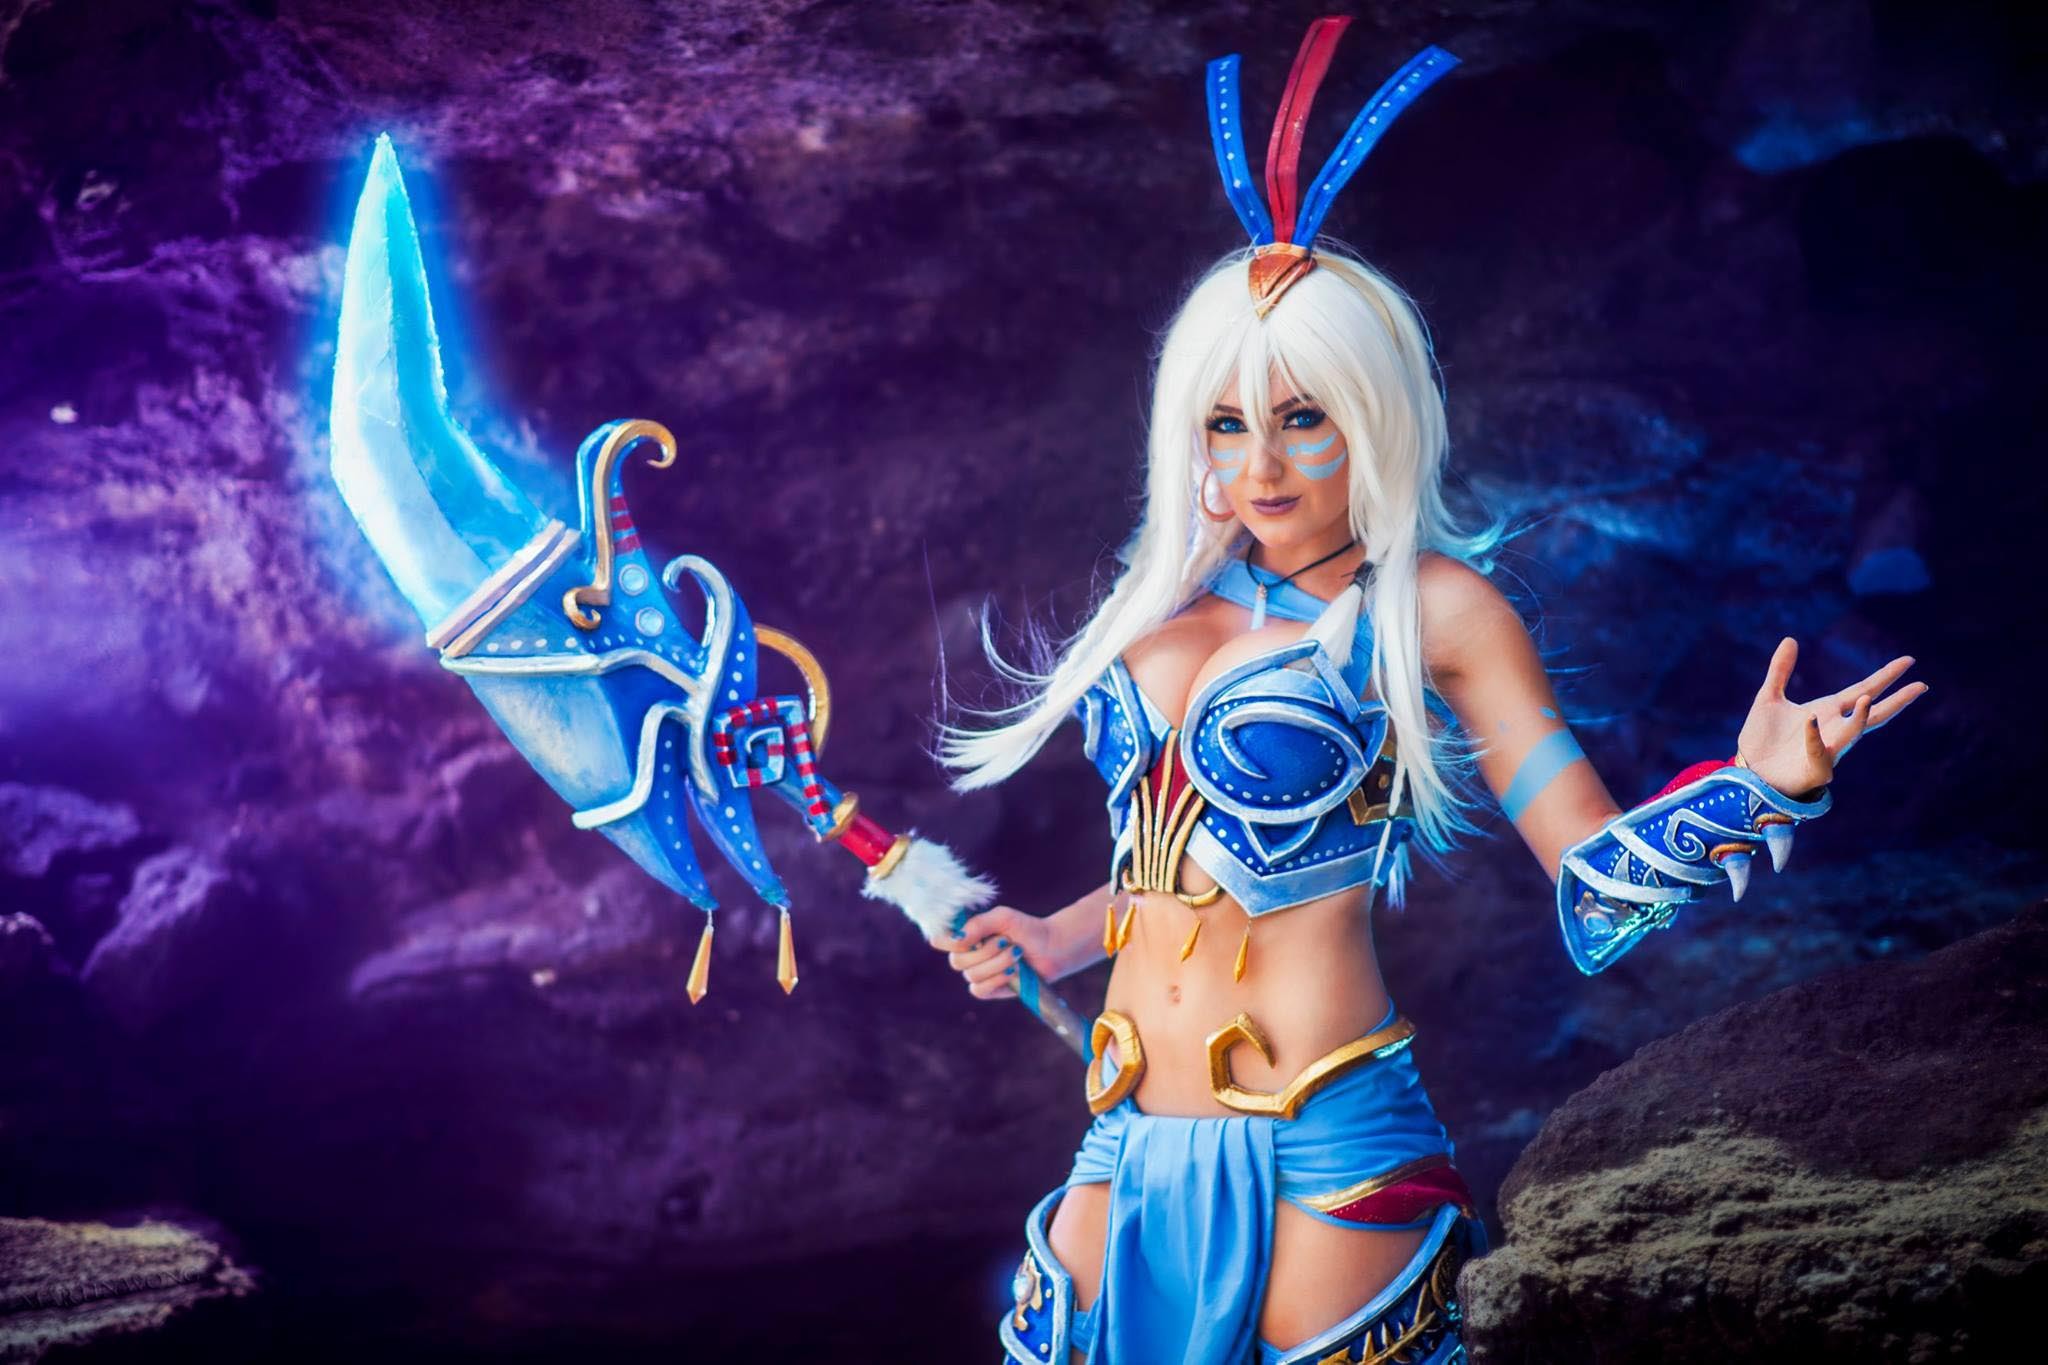 People 2048x1365 cosplay Jessica Nigri women female warrior bra spear face paint boobs costumes fantasy girl weapon white hair belly model